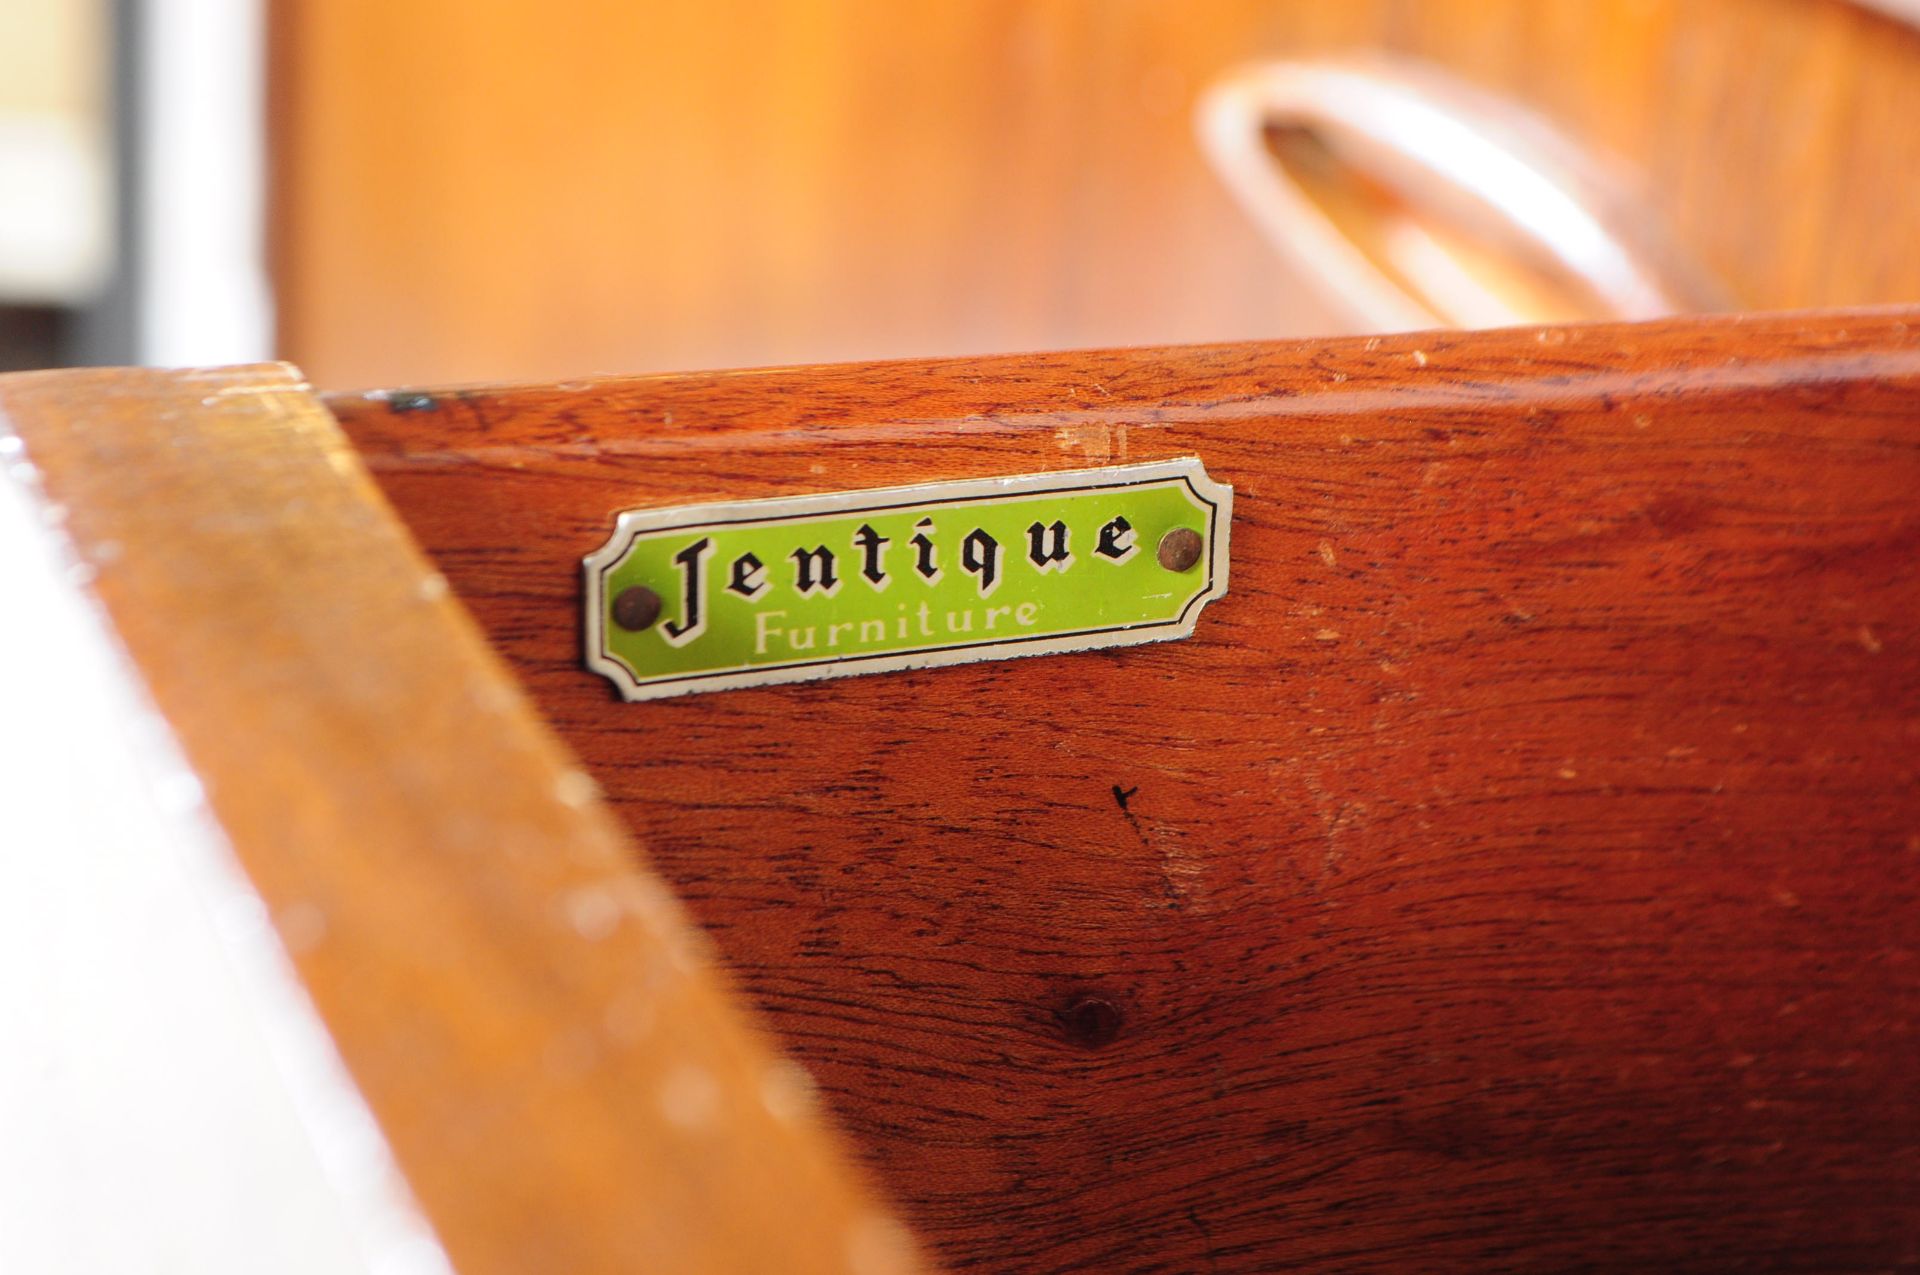 JENTIQUE FURNITURE - RETRO MID 20TH CENTURY SIDEBOARD - Image 4 of 7